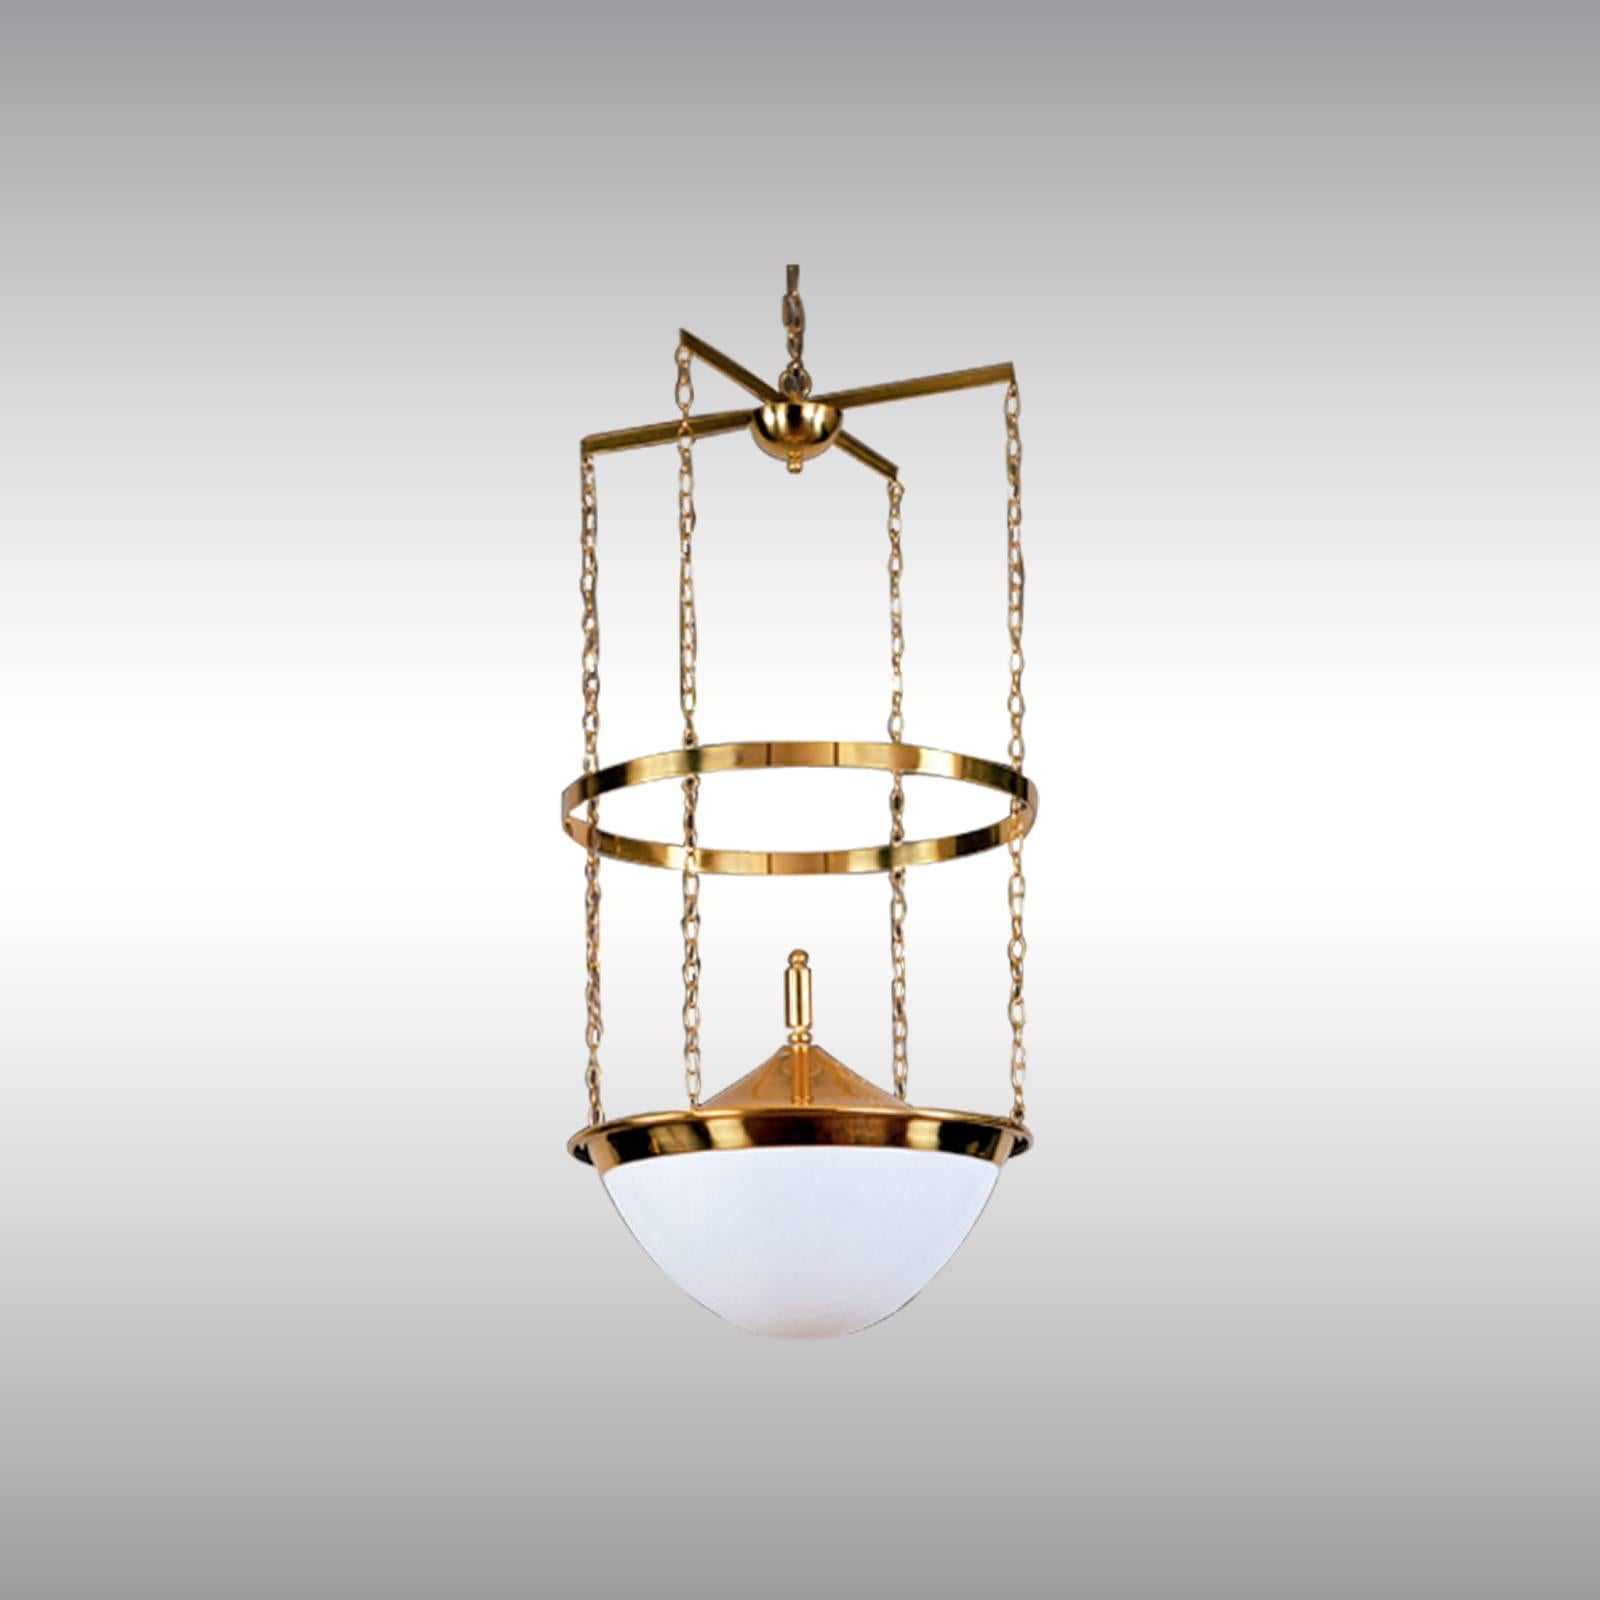 Hand-Crafted Adolf Loos Jugendstil Chandelier for the Anglo/Austrian Bank Vienna, Re-Edition For Sale